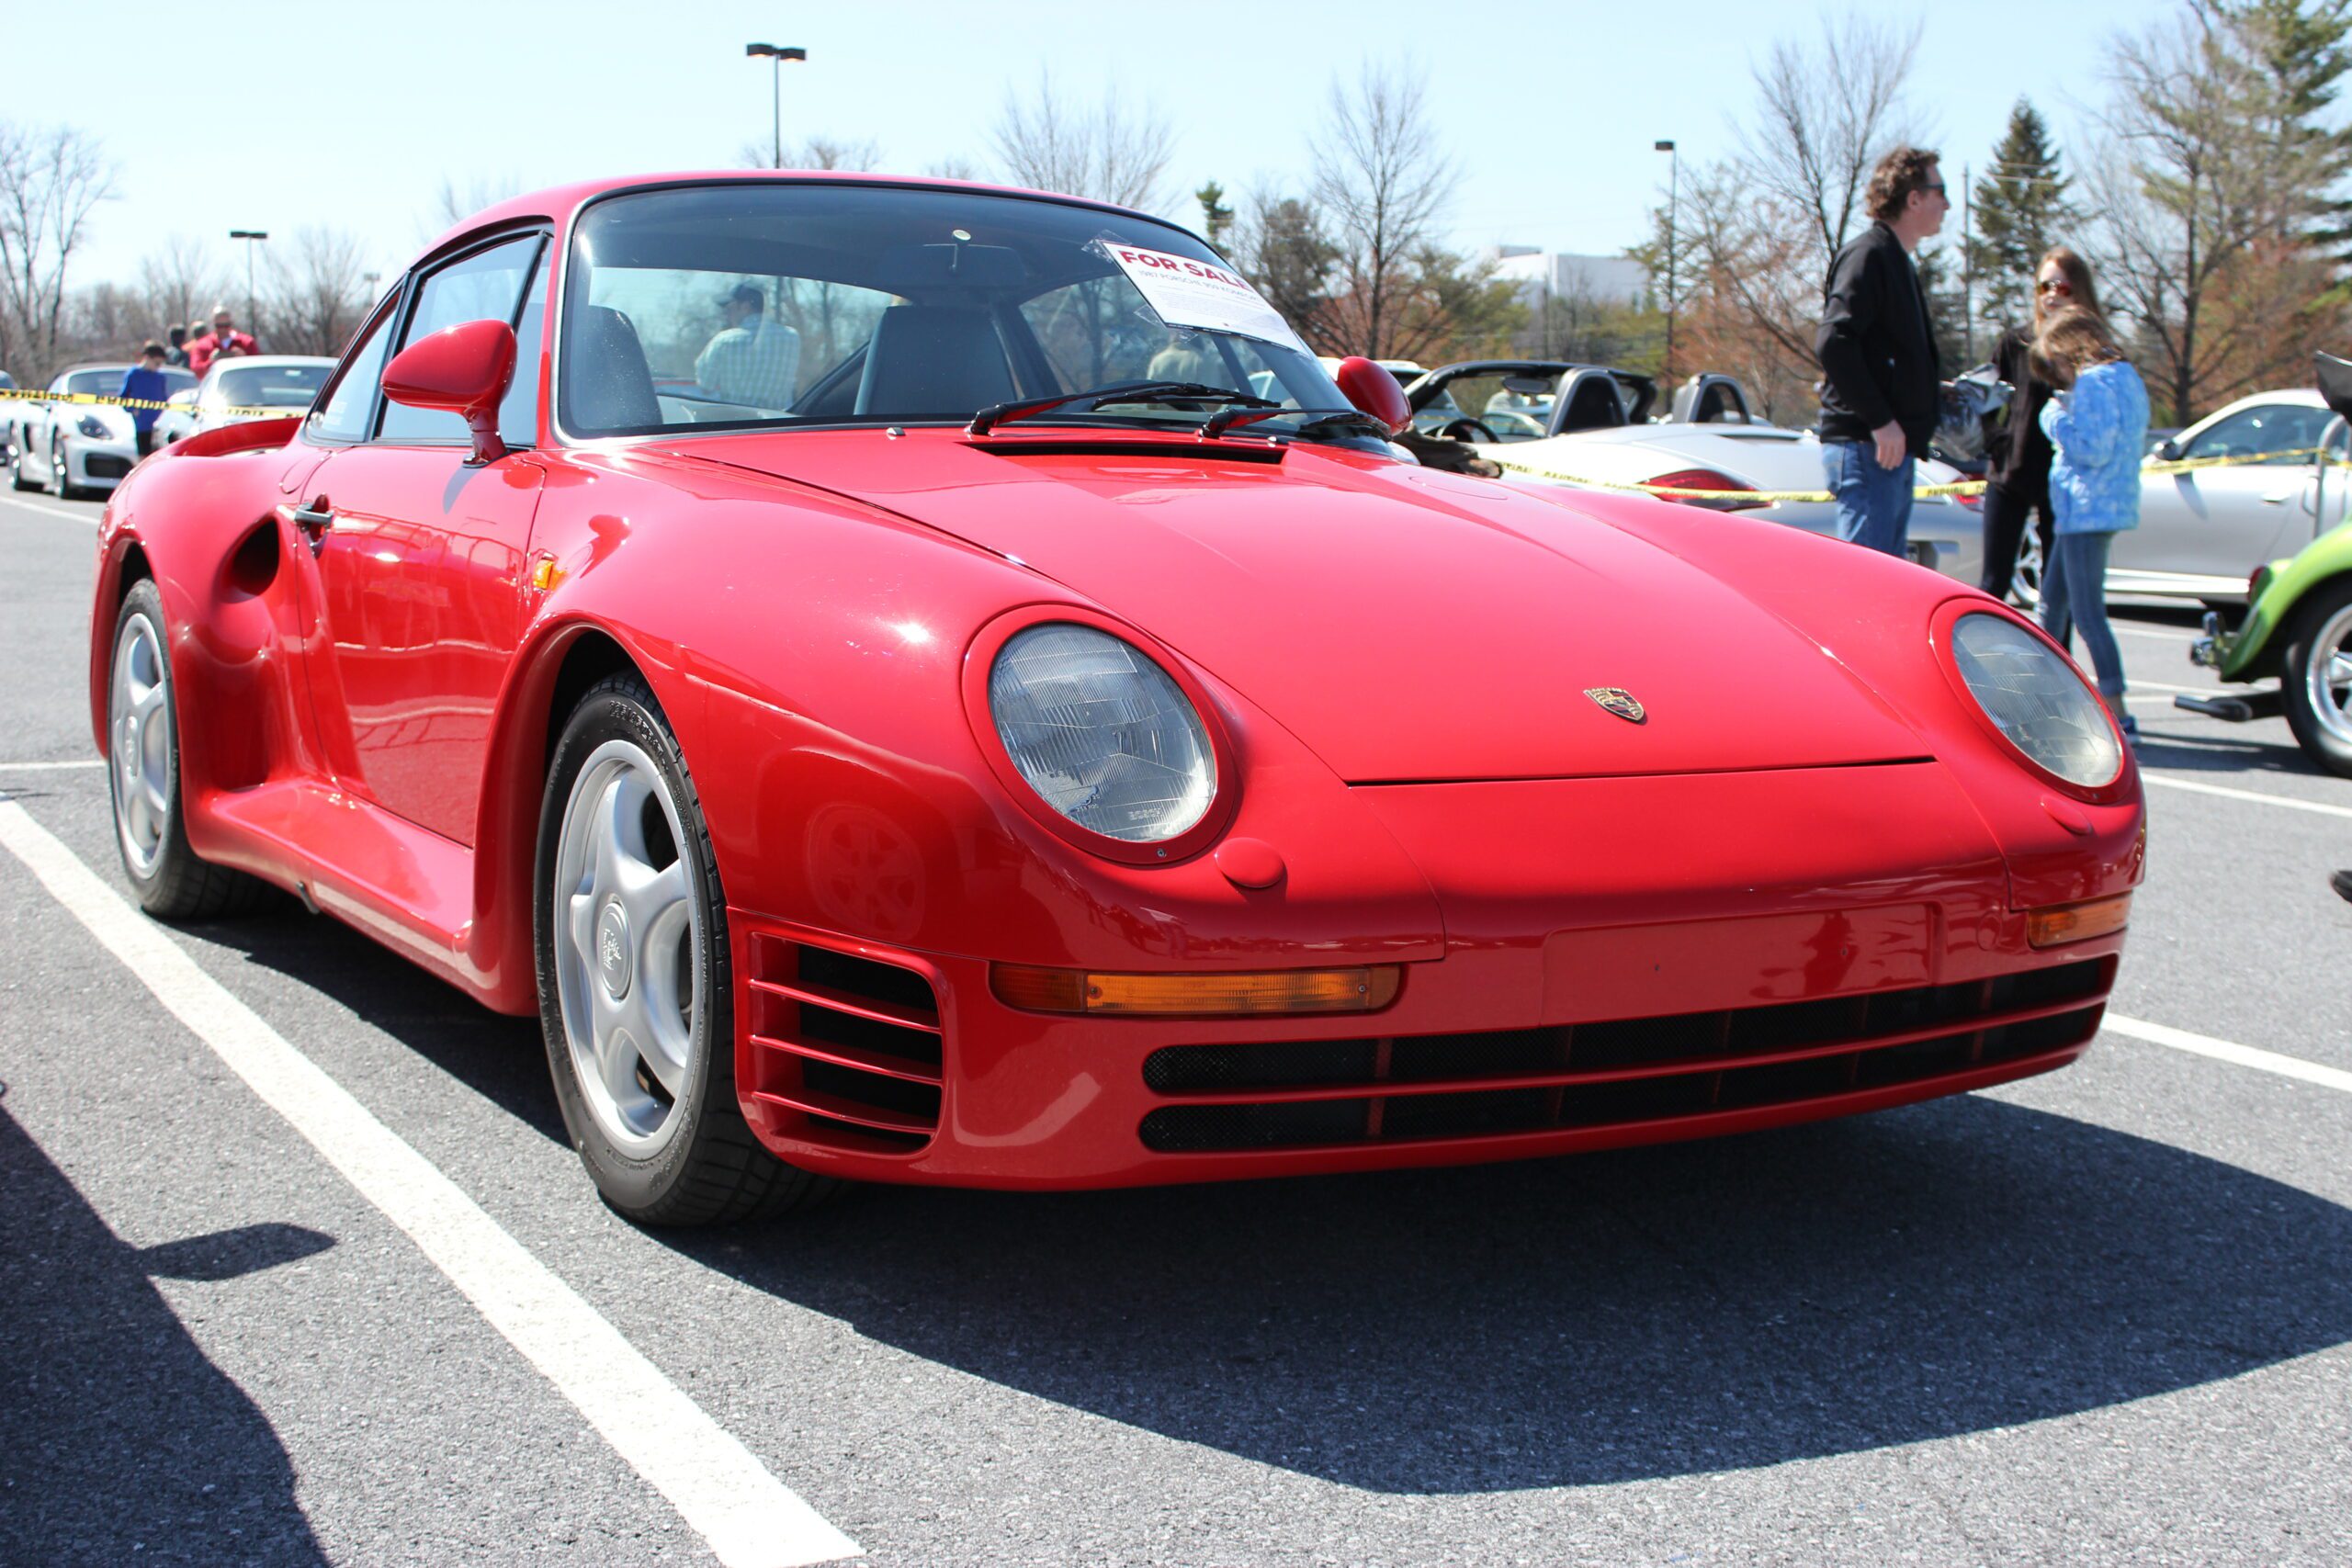 Porsche 959 on display in a lot with "For Sale" sticker in windscreen